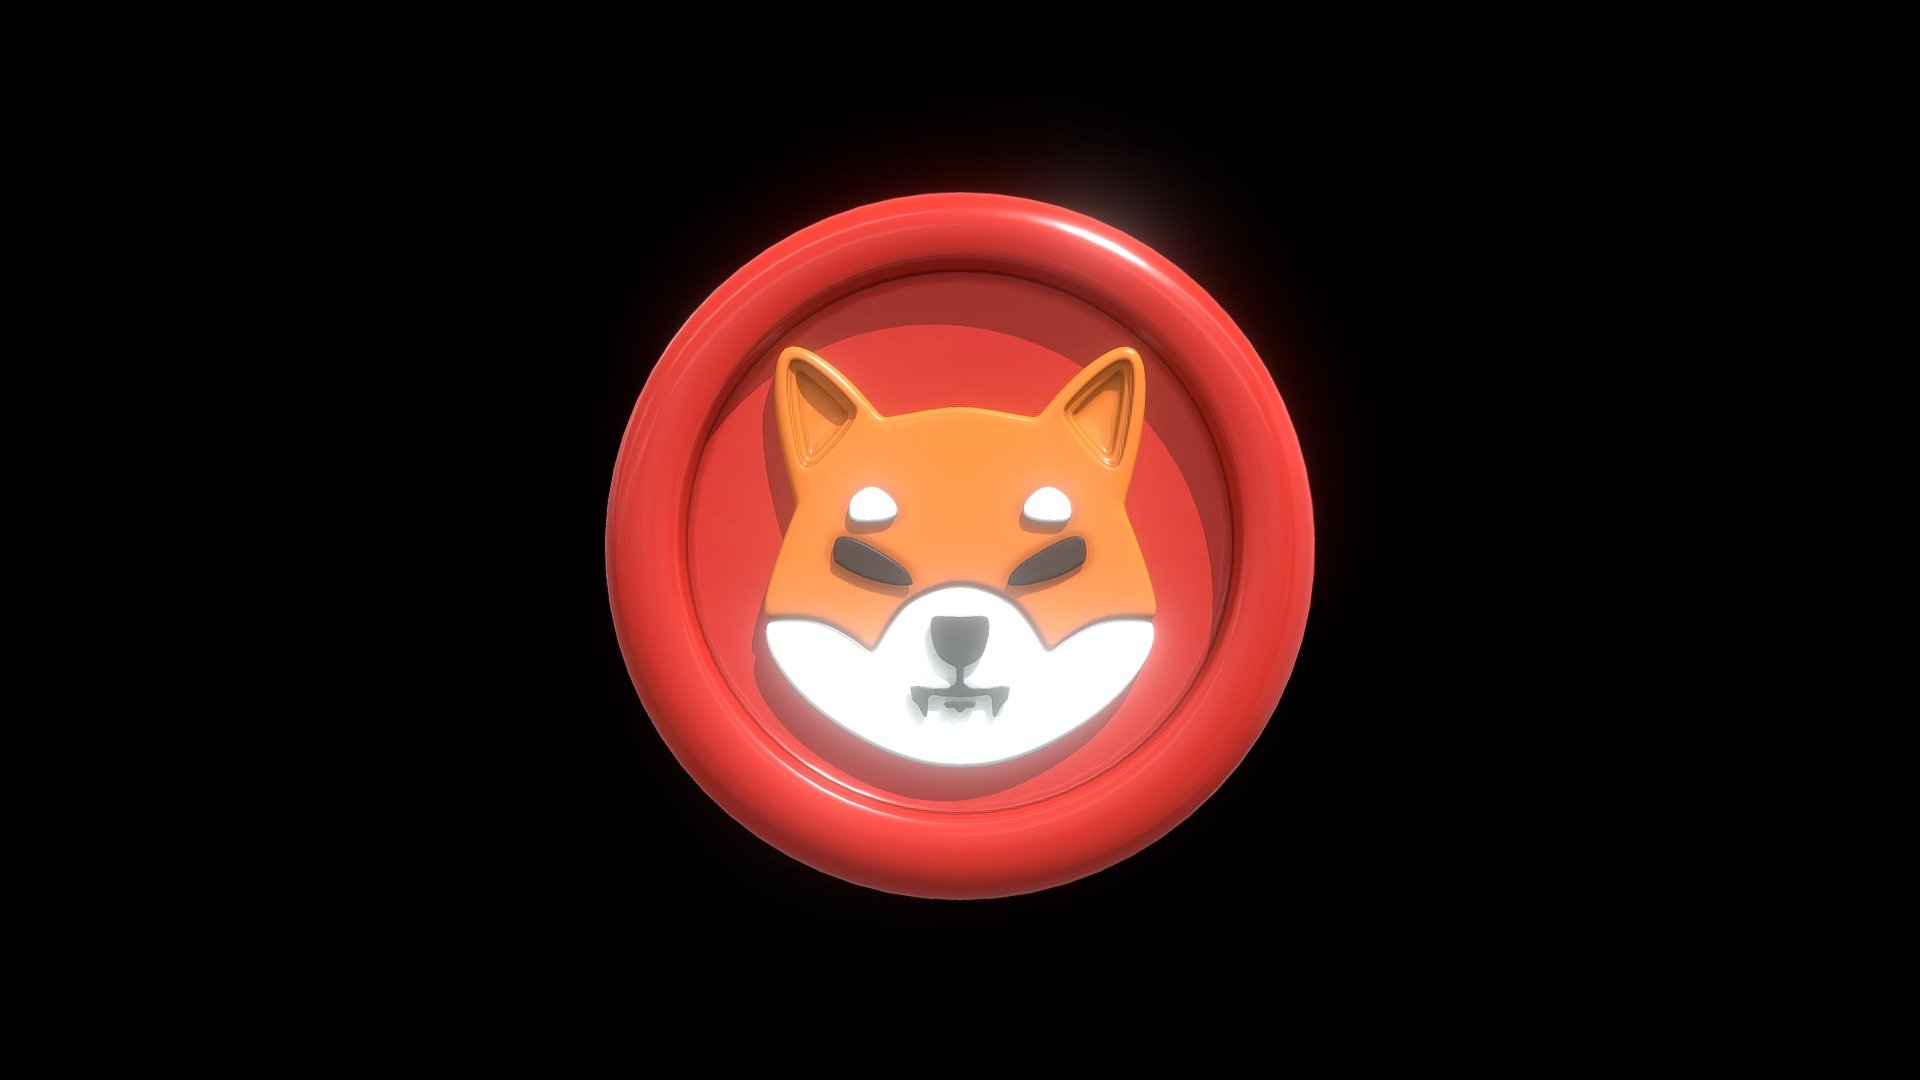 Shiba Inu or SHIB Red Coin model with cartoon style Made in Blender 3.1.2

This model does include a TEXTURE, DIFFUSE and ROUGHNESS MAP, but if you want to change the color you can change it in the blend file, just use the principled bsdf and play with the rough and base color parameter

in the blender file i just included the lighting setting for rendering just like the preview image

If you want to get this model, just check my Artstation Profile Page in Here
https://www.artstation.com/cangbacang/profile - Shiba Inu or SHIB Red coin with cartoon style - 3D model by cangbacang 3d model